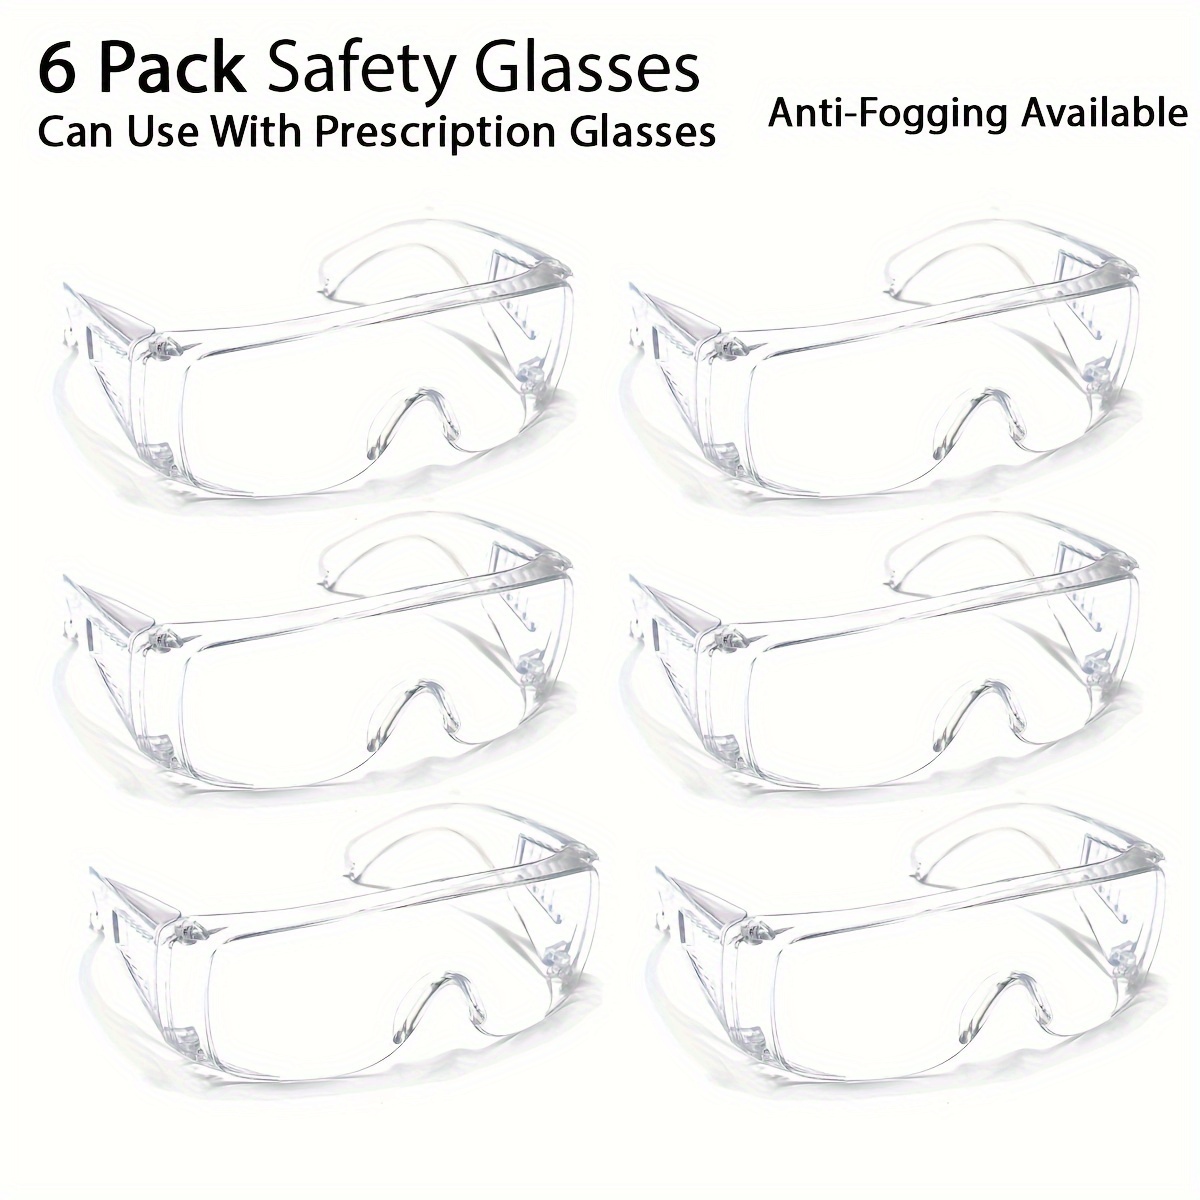 

6 Pack/12 Pack/300 Pack Safety Glasses Not Anti Fog/anti Fog, Temples Ventilation Design, Eye Protective Glasses, Dust Proof, Liquid Splash Proof, Lightweight, For Industrial Works, Labs, Hospital Use